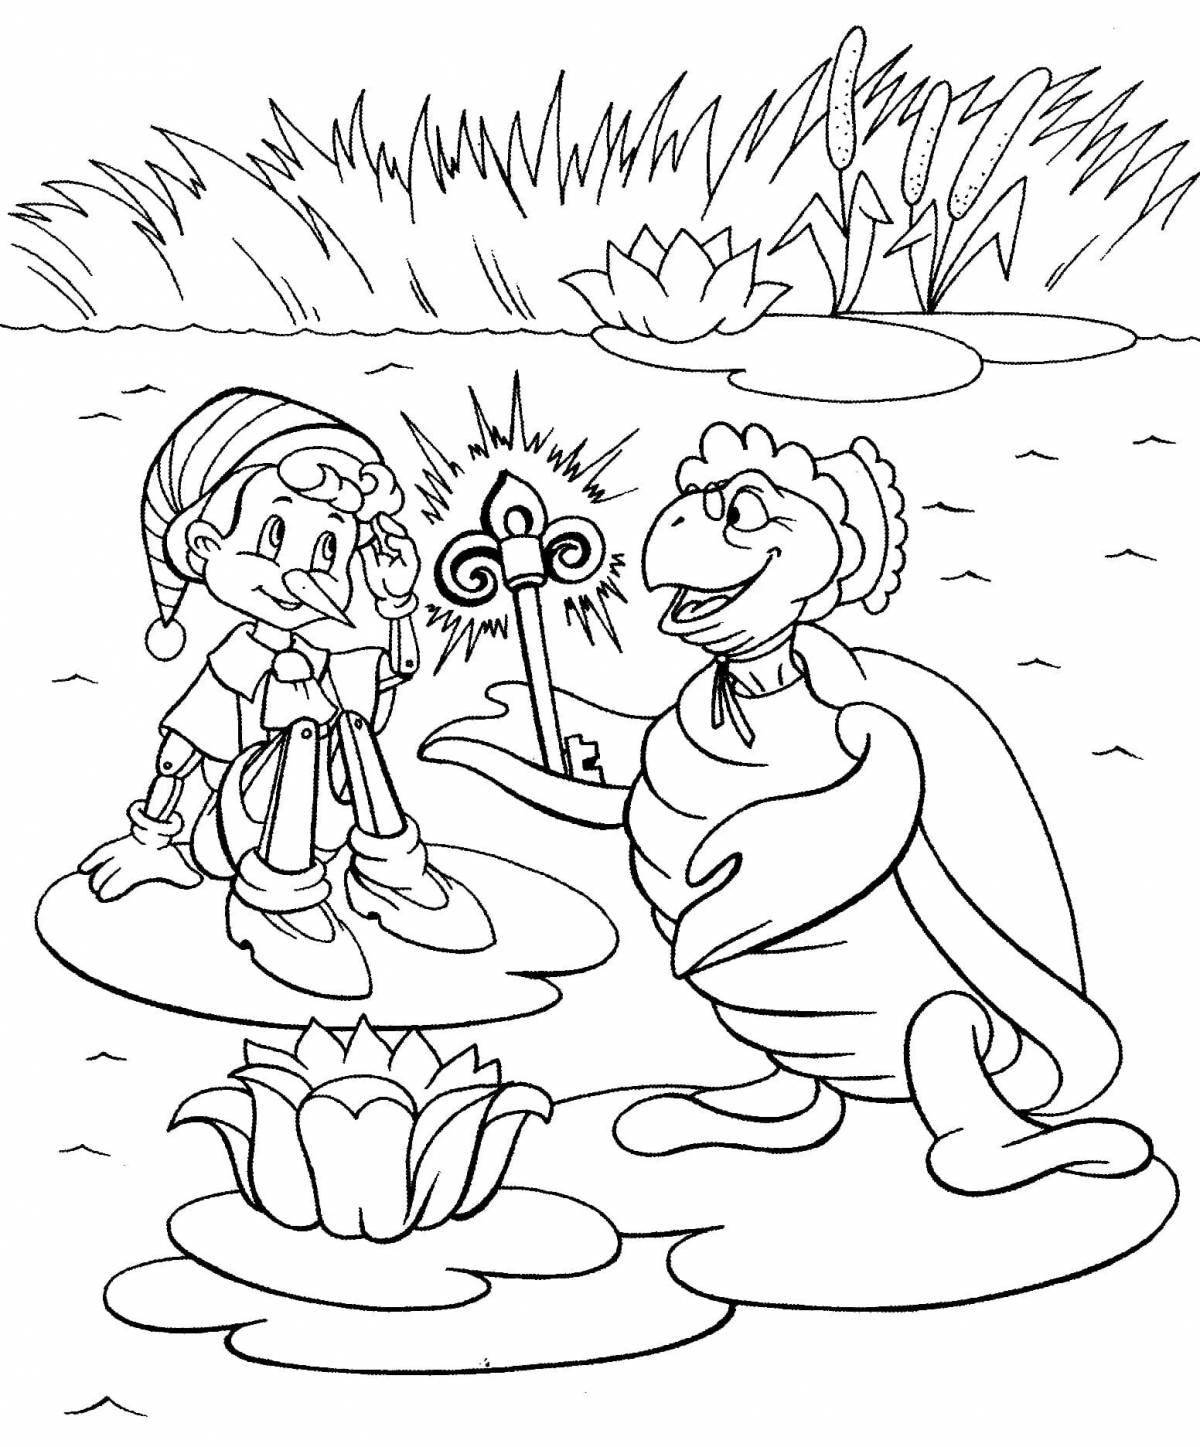 Coloring page dazzling pinocchio